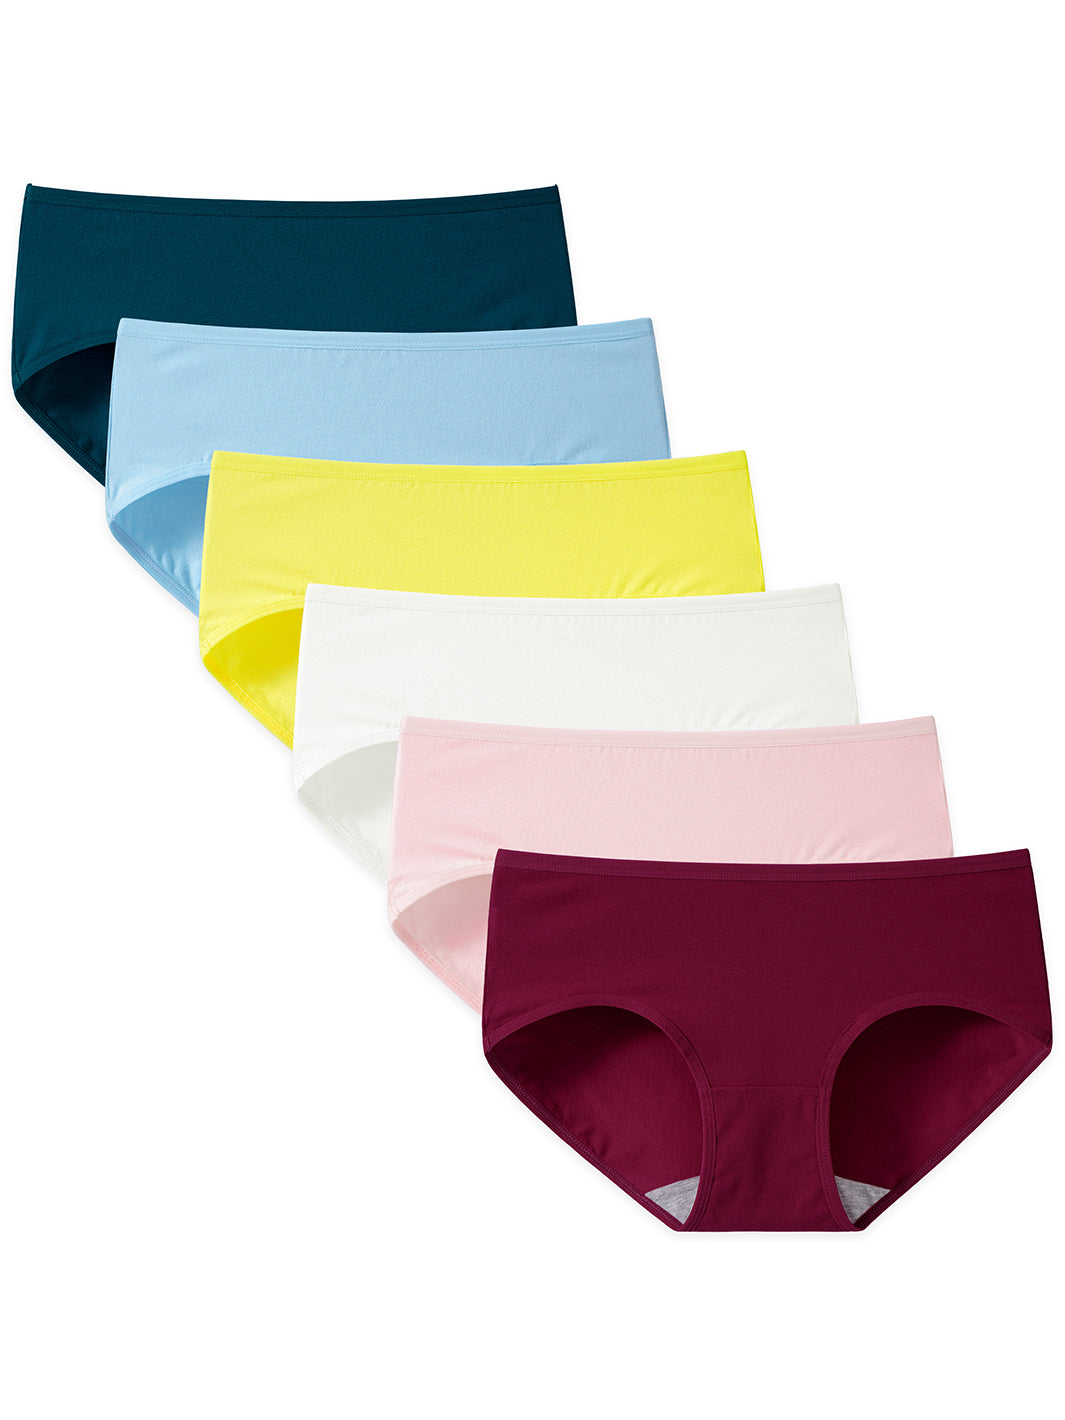 Buy Rupa Women's Cotton Hipsters Regular Solid Panties Pack of 6 Plain P6  90_Assorted at